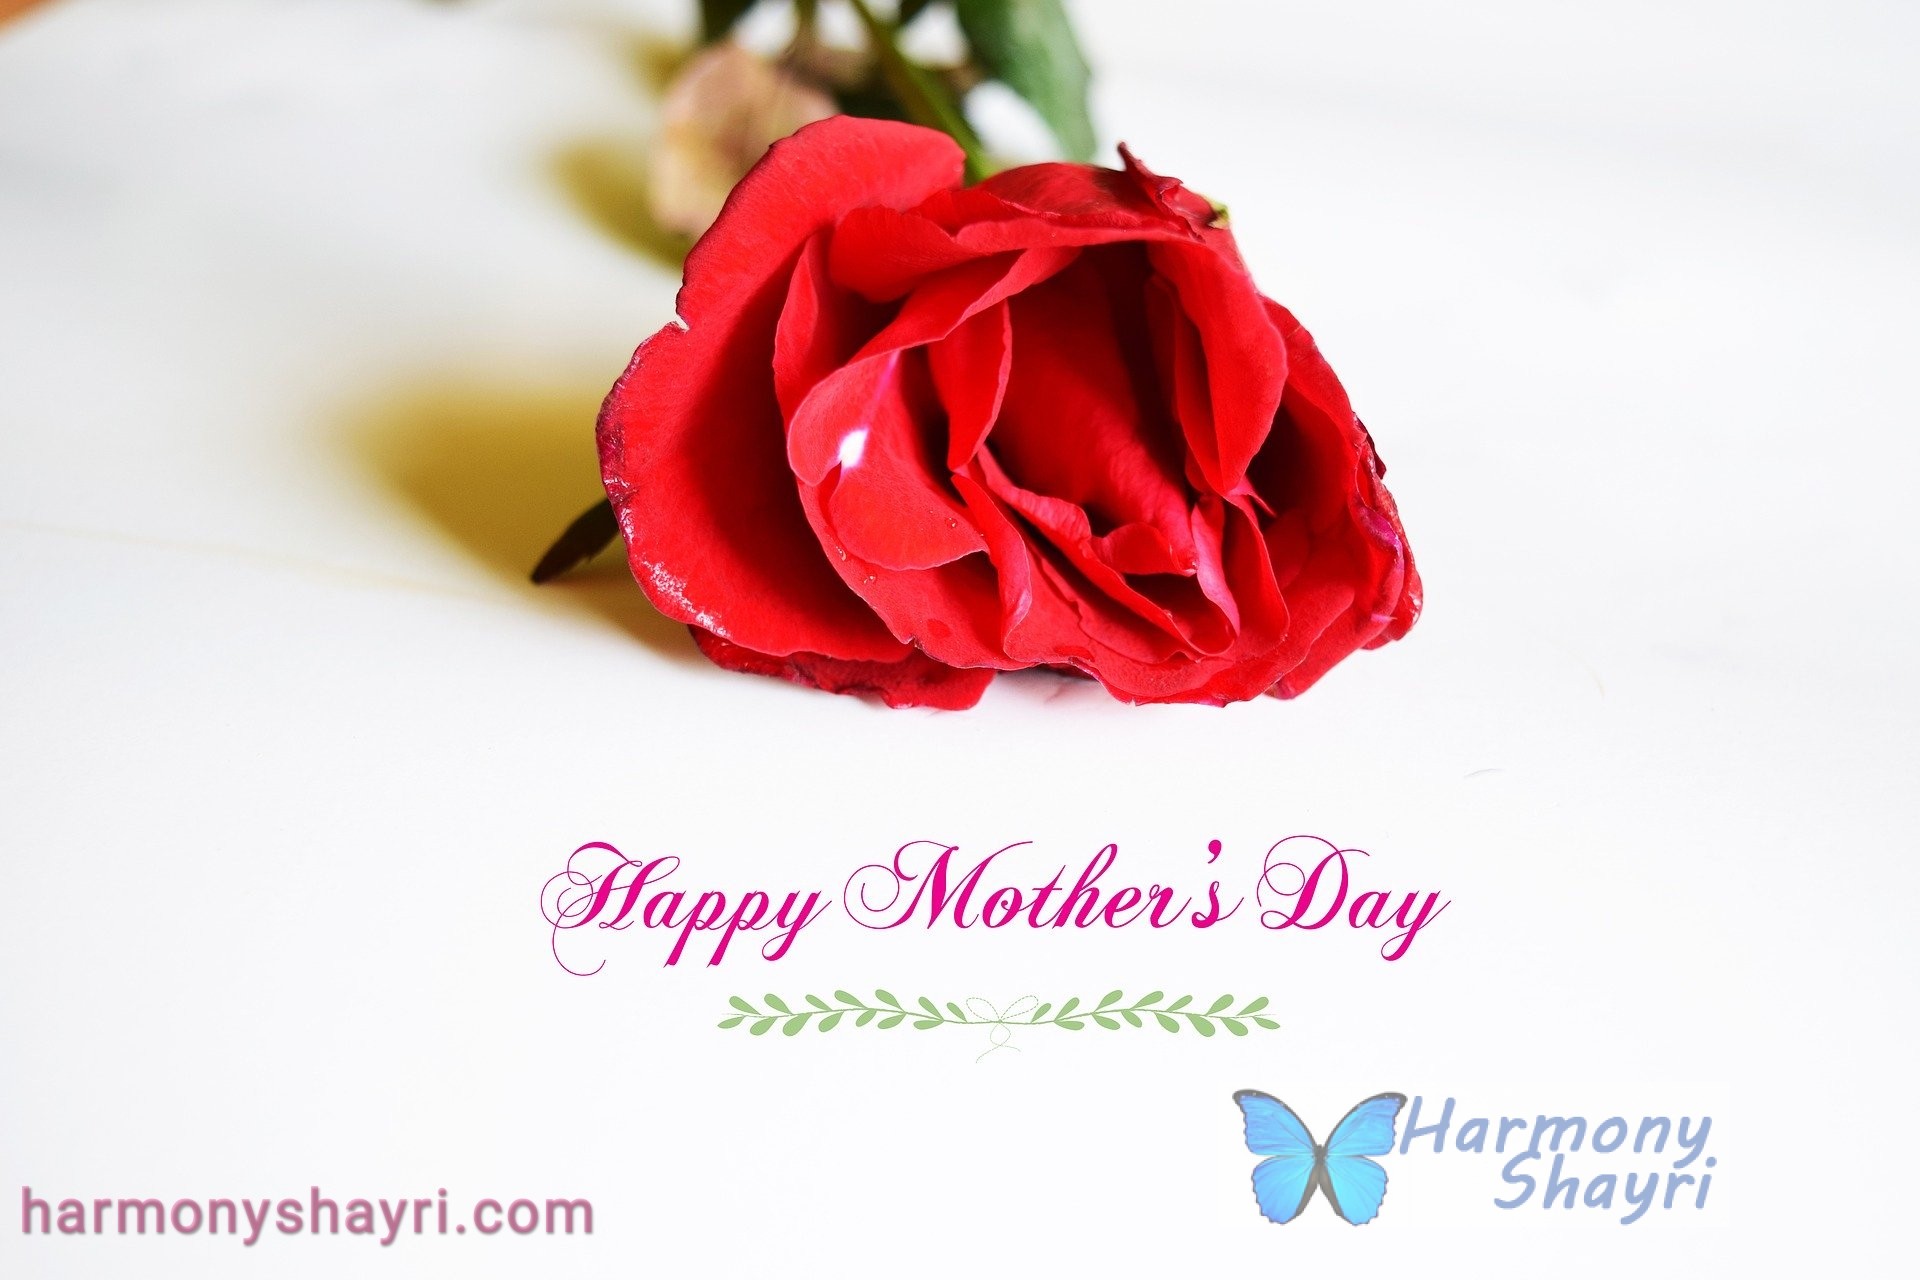 Hapoy Mother’s Day